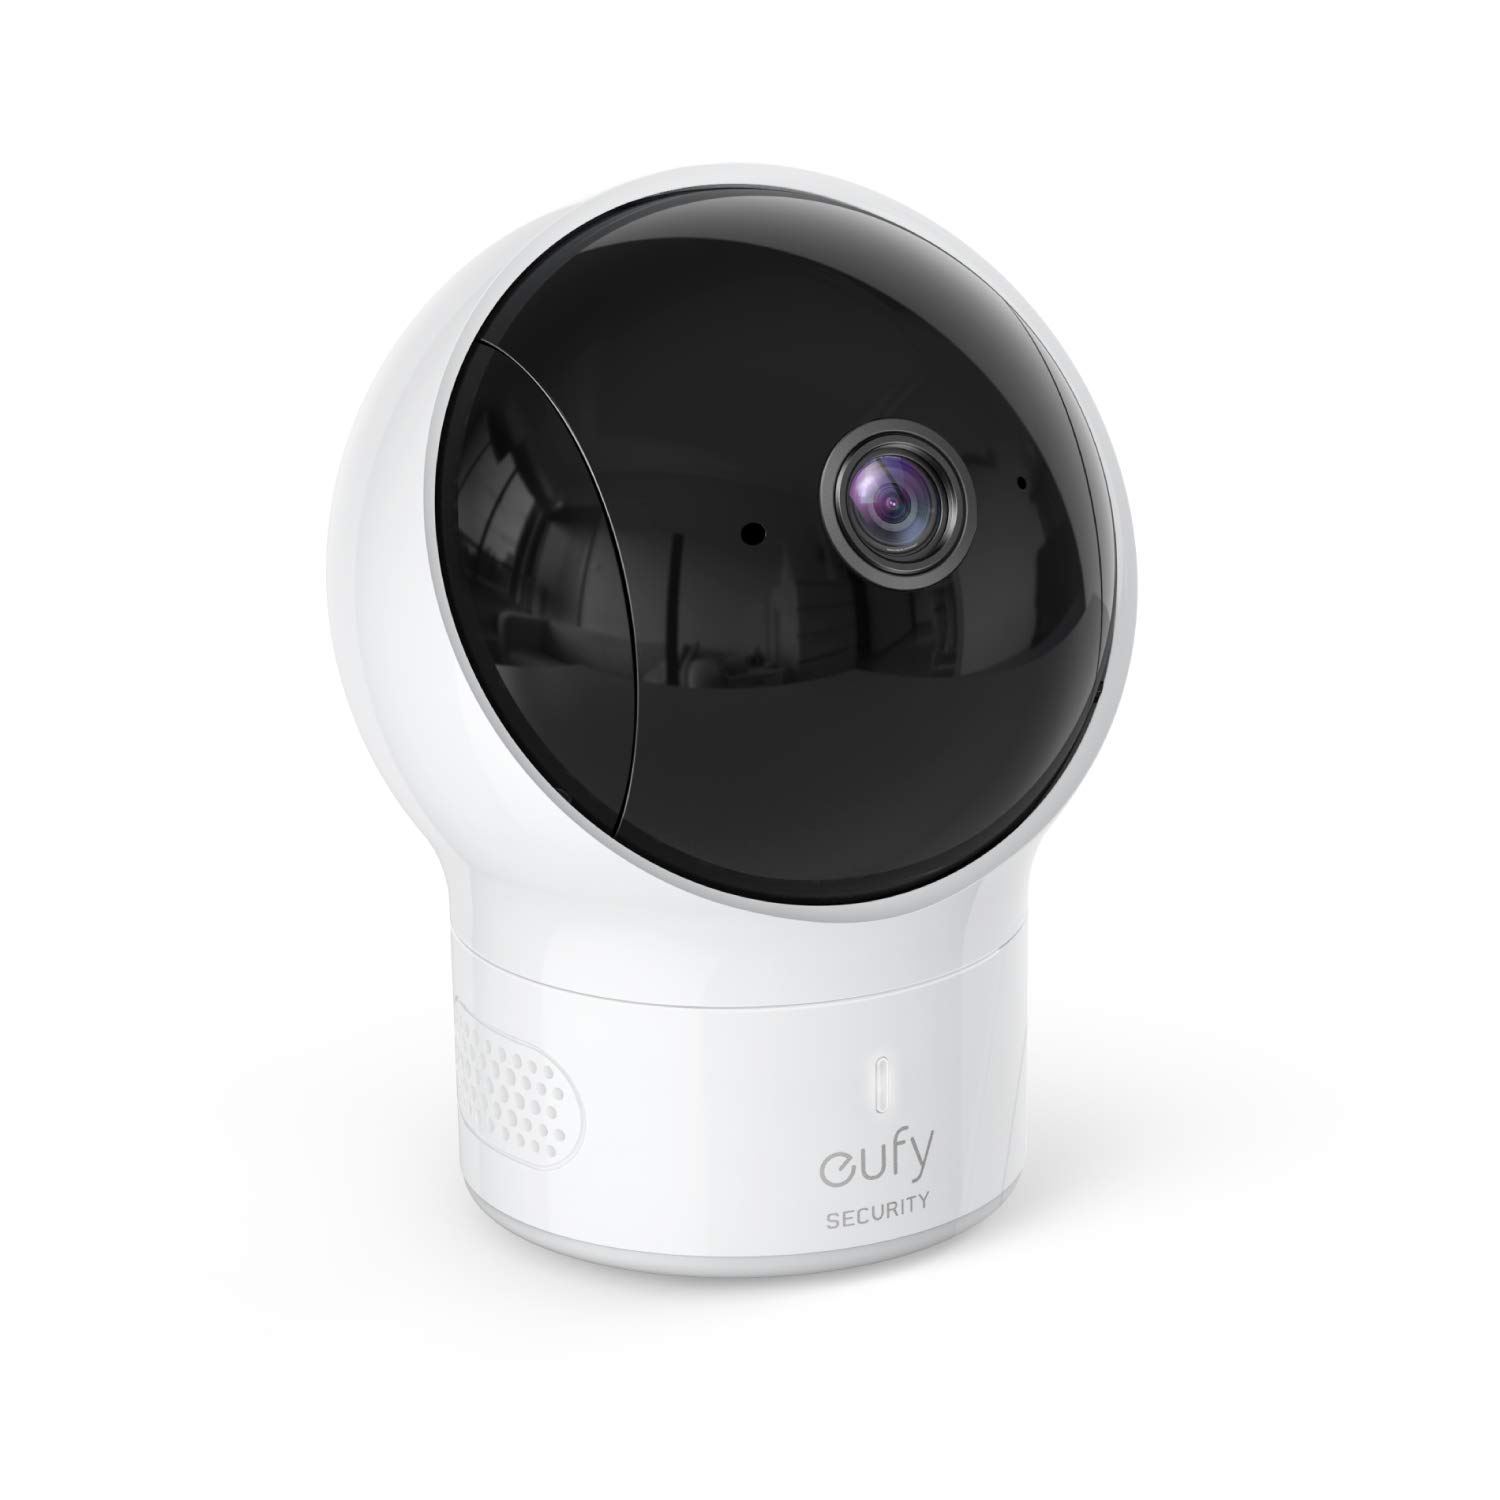 eufy security Add-on Camera for Baby Monitor, Baby Monitor Camera, eufy Baby Video Baby Monitor, 720p HD Resolution, Ideal for New Moms, Easy 